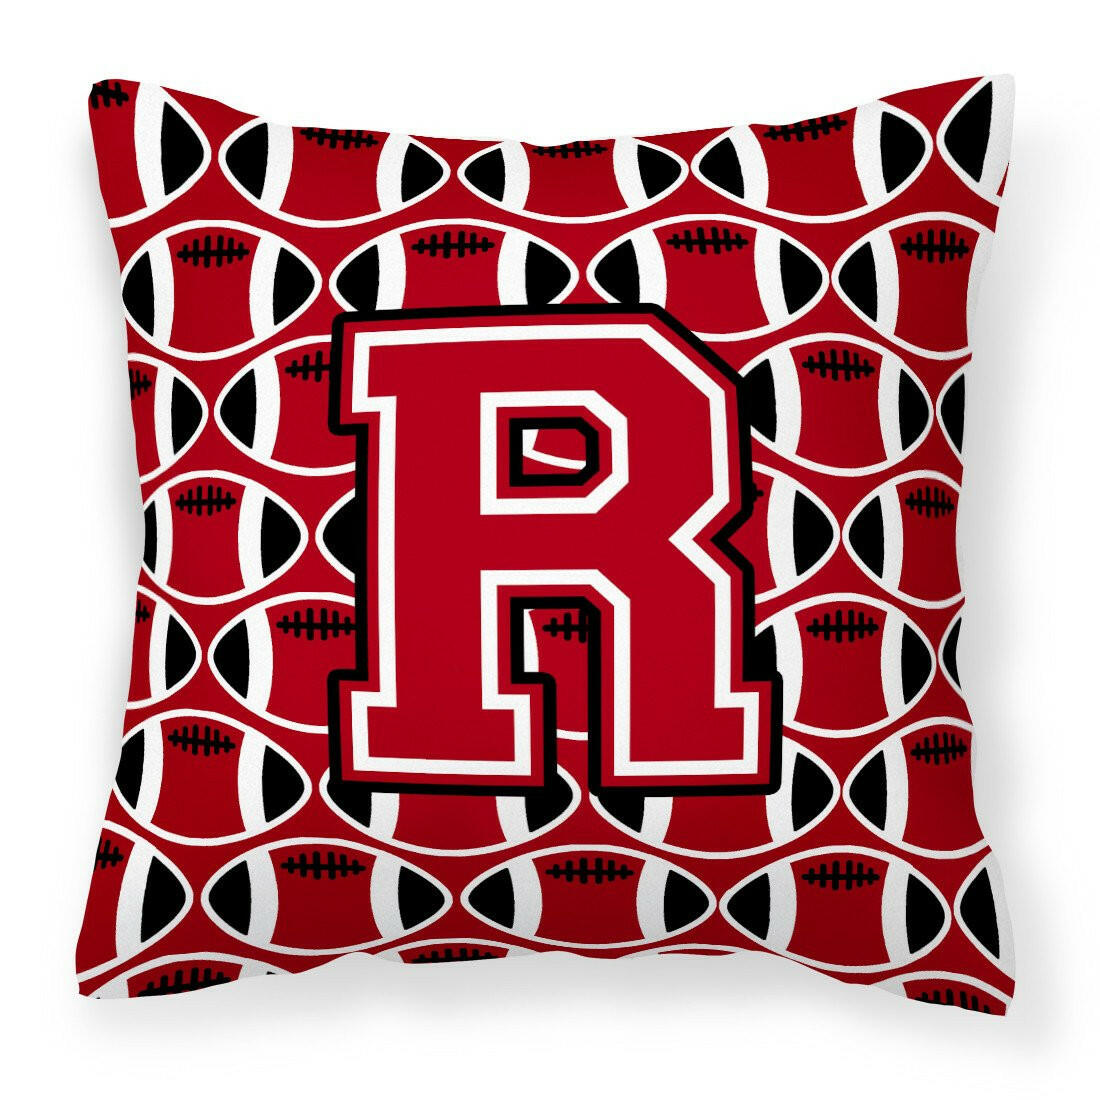 Letter R Football Red, Black and White Fabric Decorative Pillow CJ1073-RPW1414 by Caroline's Treasures